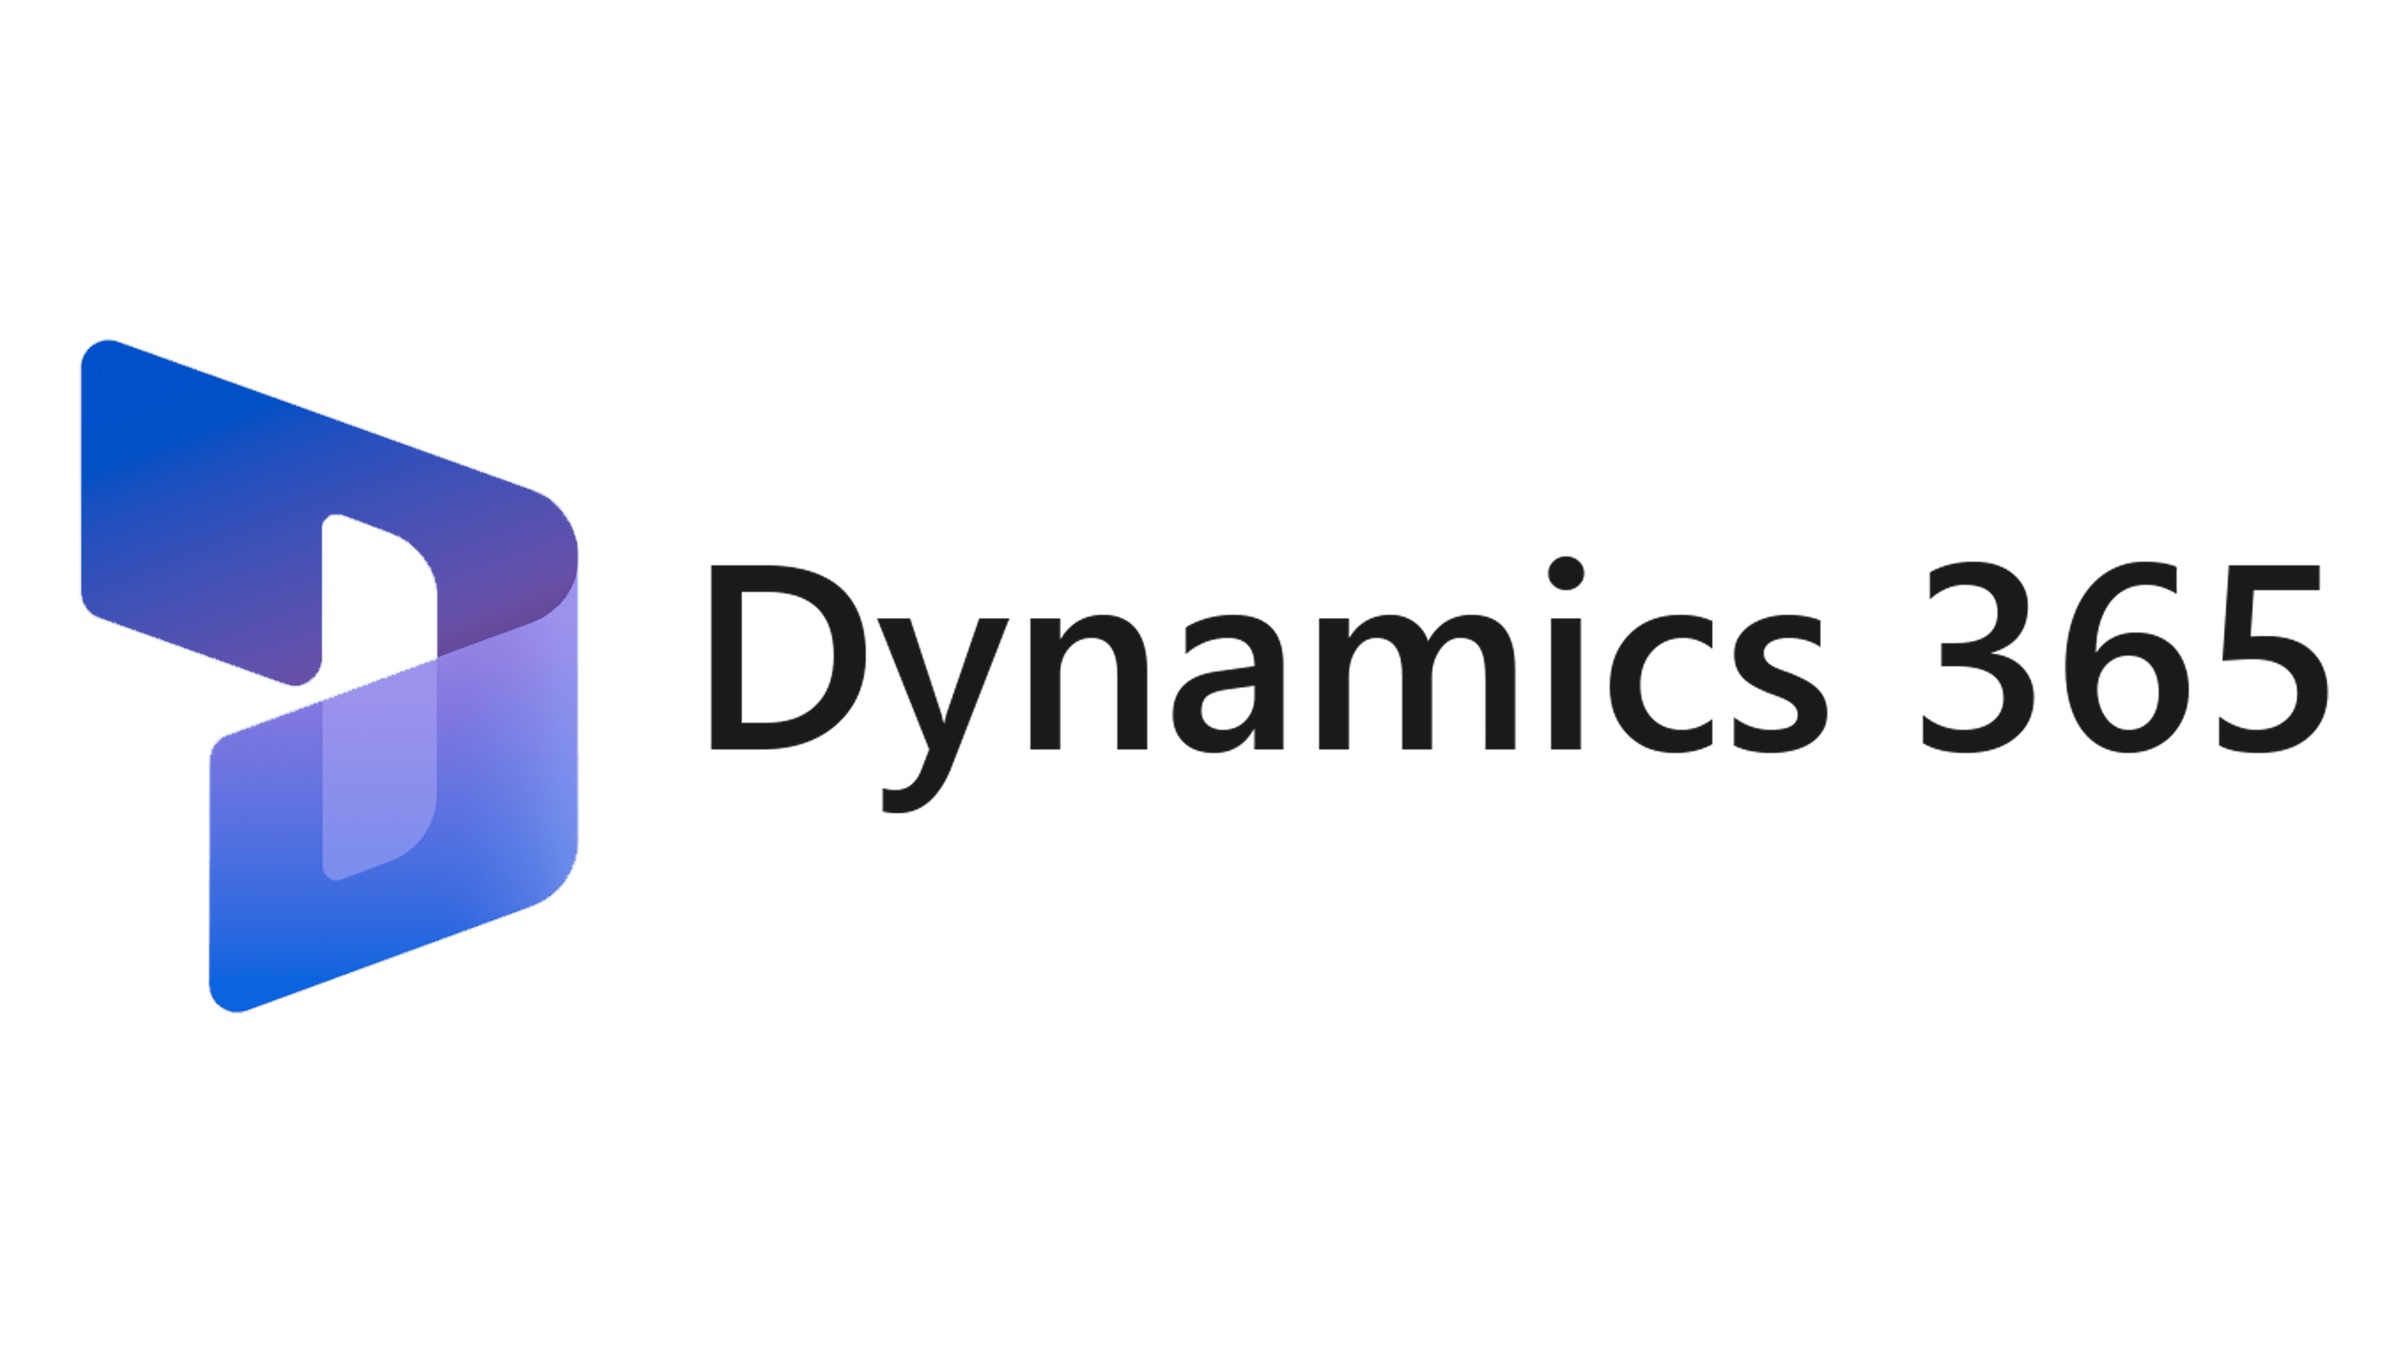 Explore a wide range of Microsoft Dynamics 365 services designed to streamline your business operations. Boost productivity, customer engagement and growth with our expert solutions